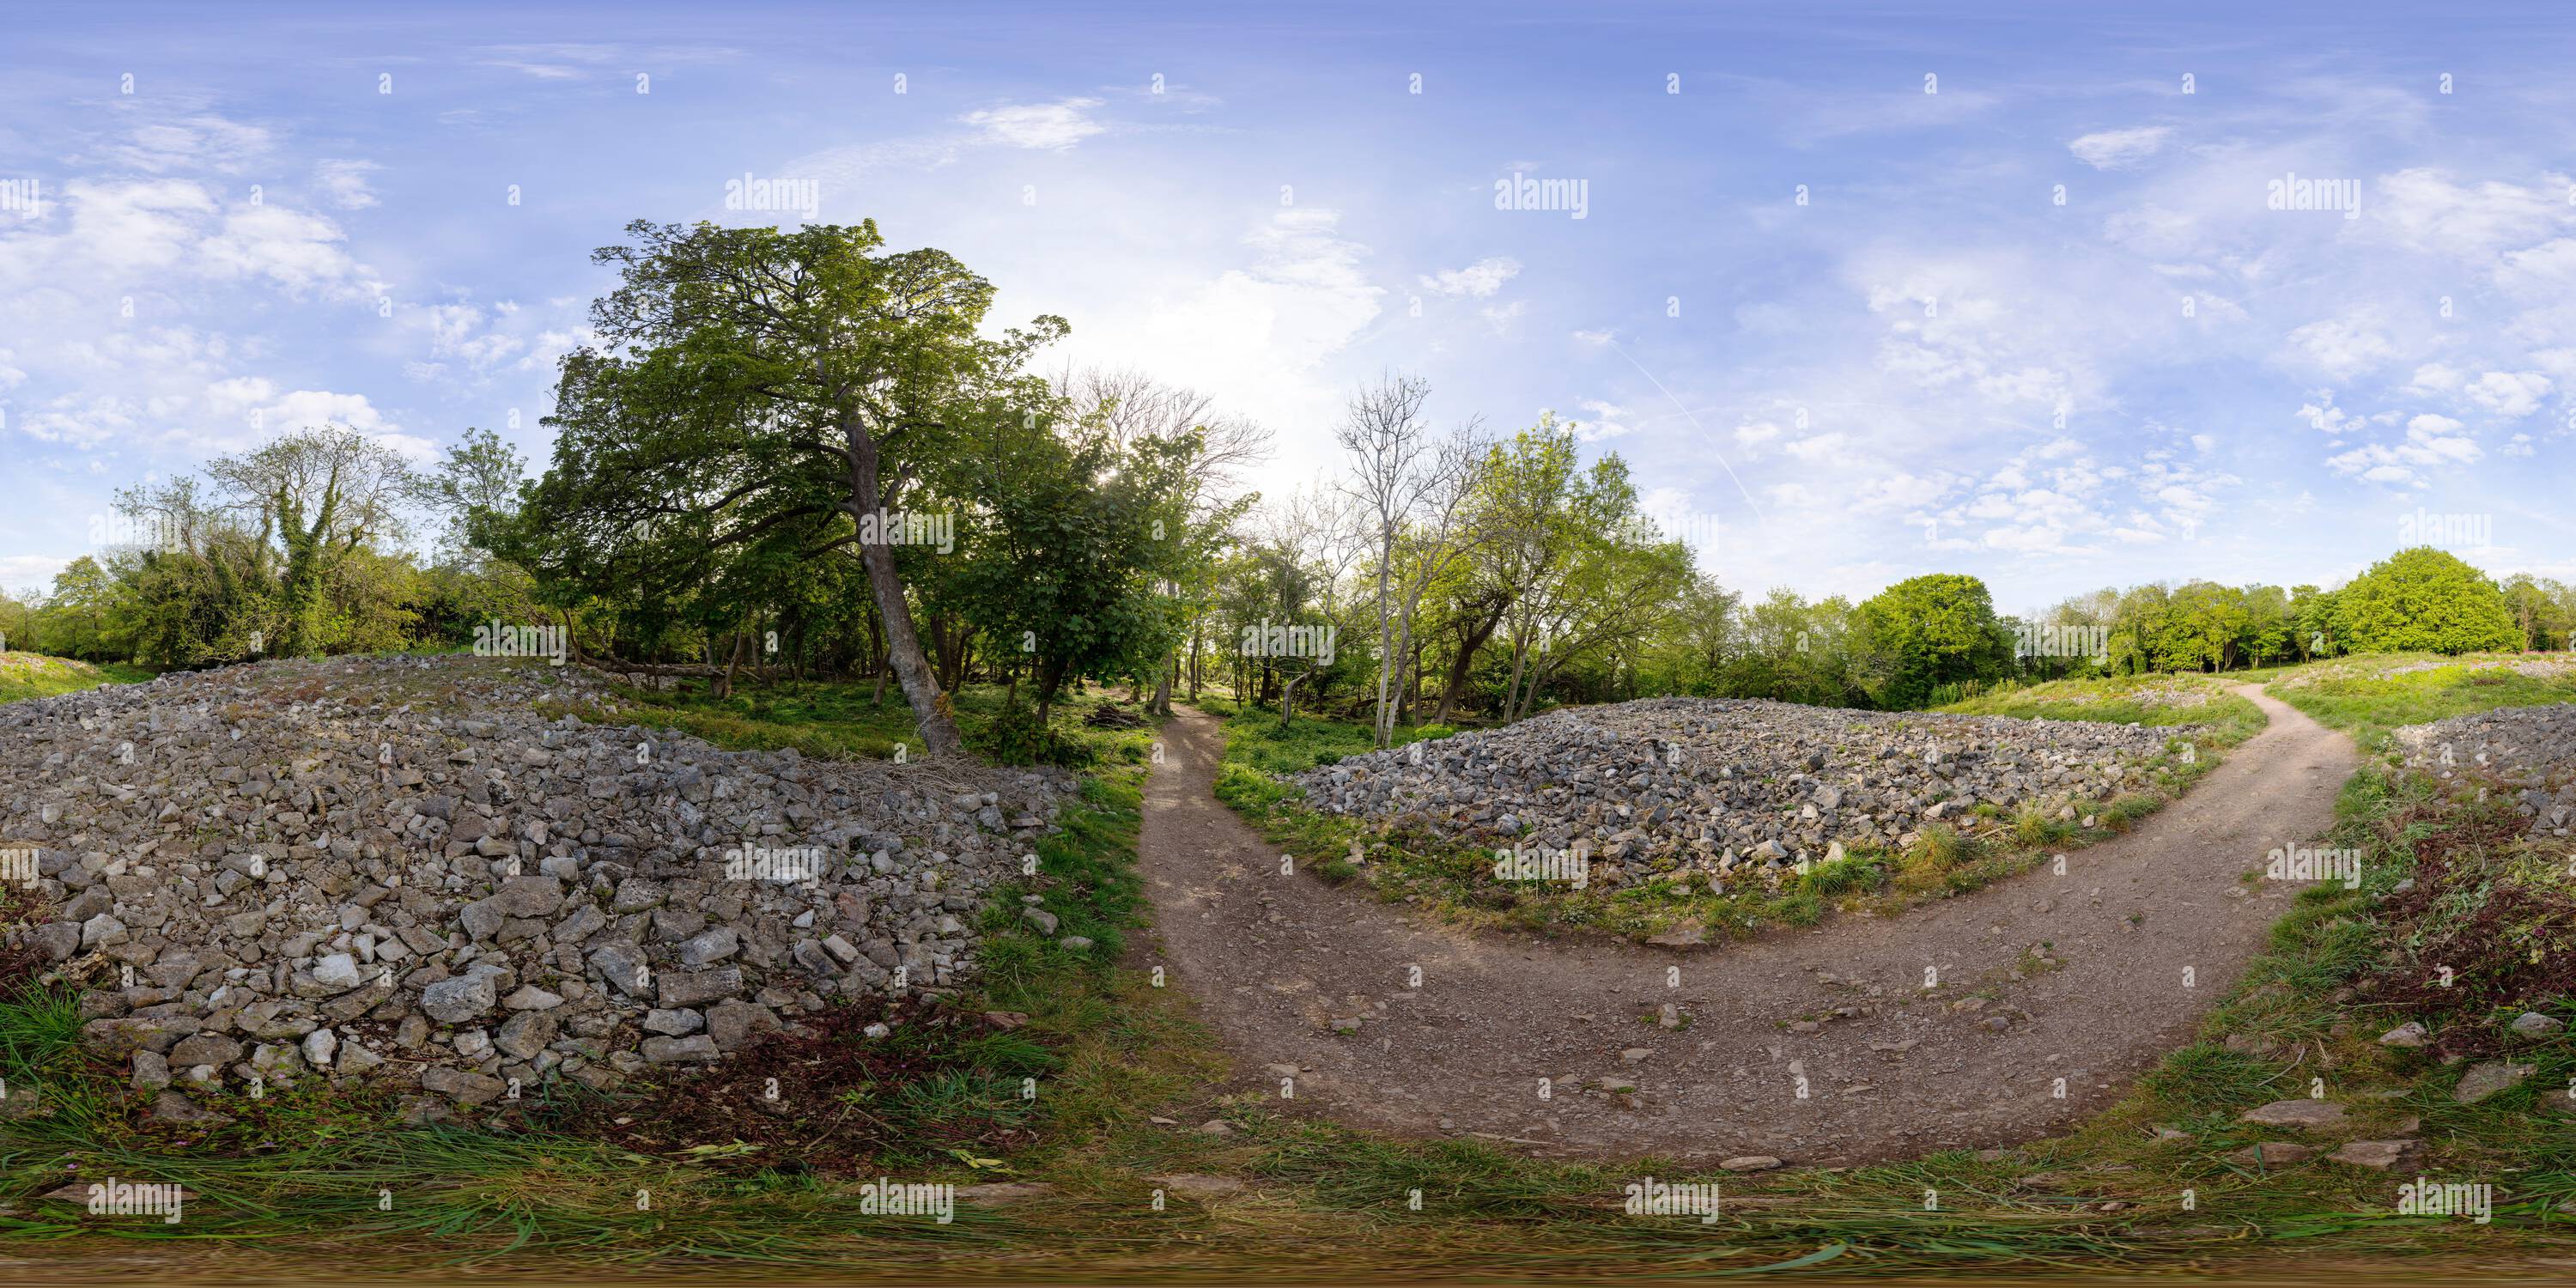 360 degree panoramic view of The eastern ramparts of Worlebury Camp, an Iron Age hill fort on Worlebury Hill, Weston-super-Mare, North Somerset, England, UK